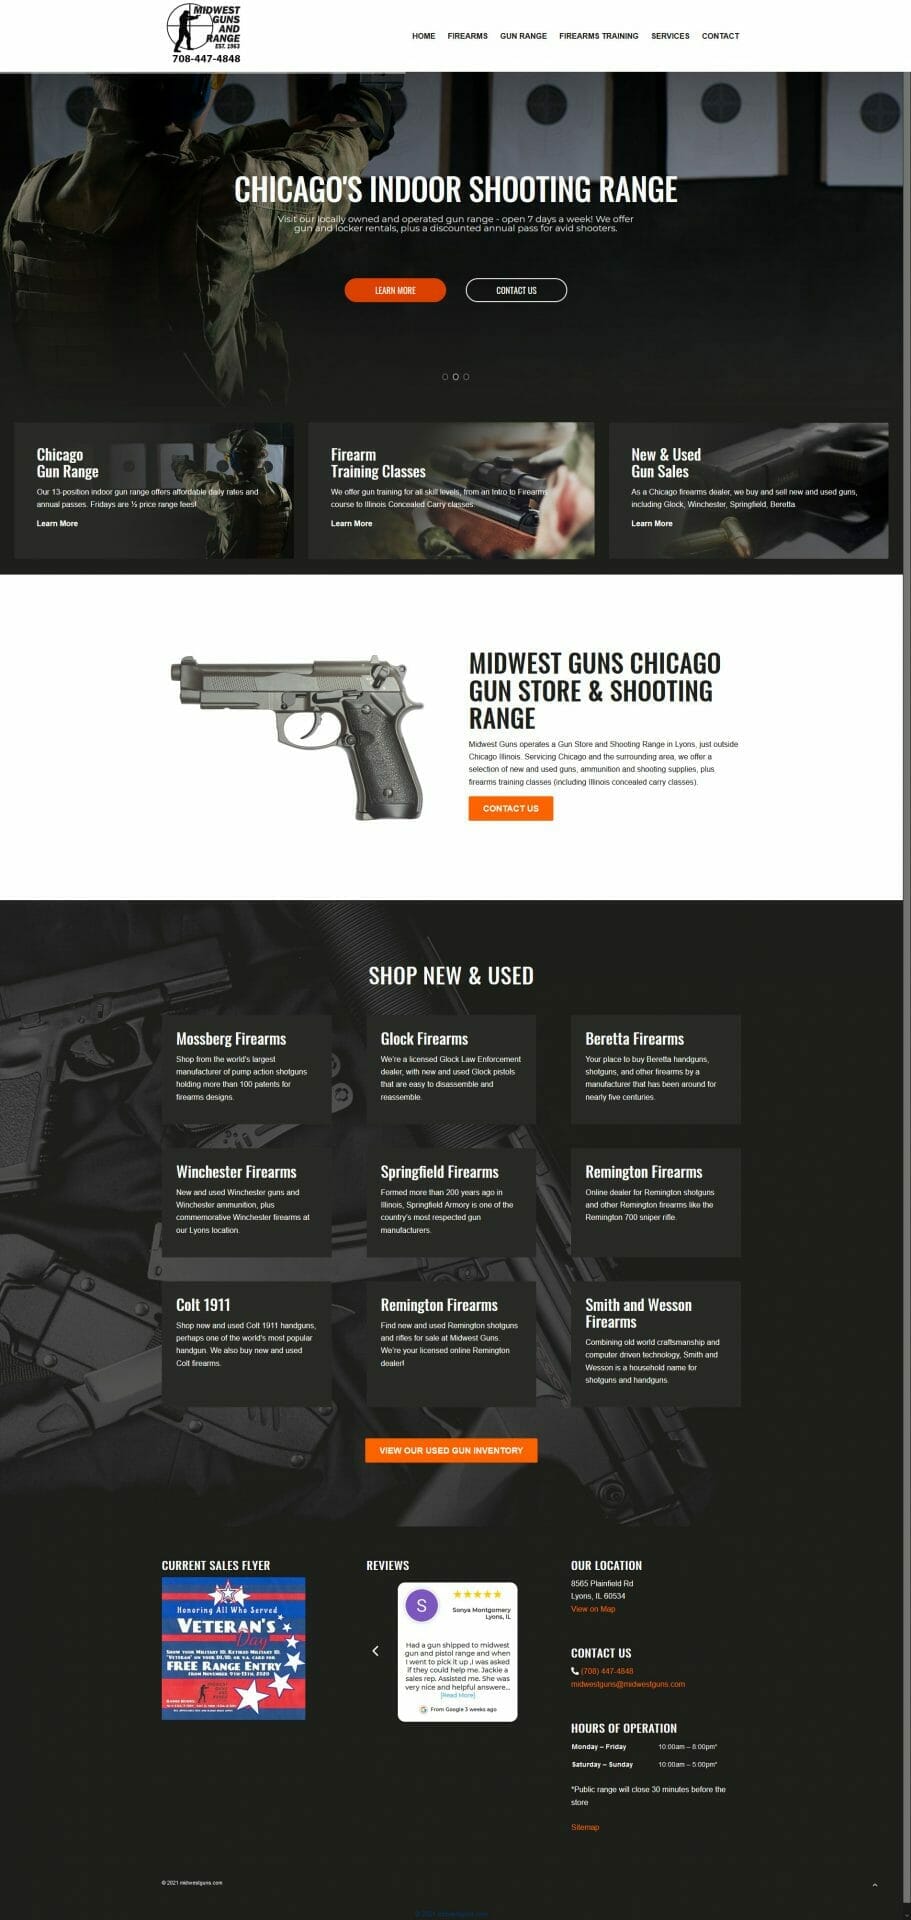 Images & text for Midwest Guns Chicago gun store and shooting range